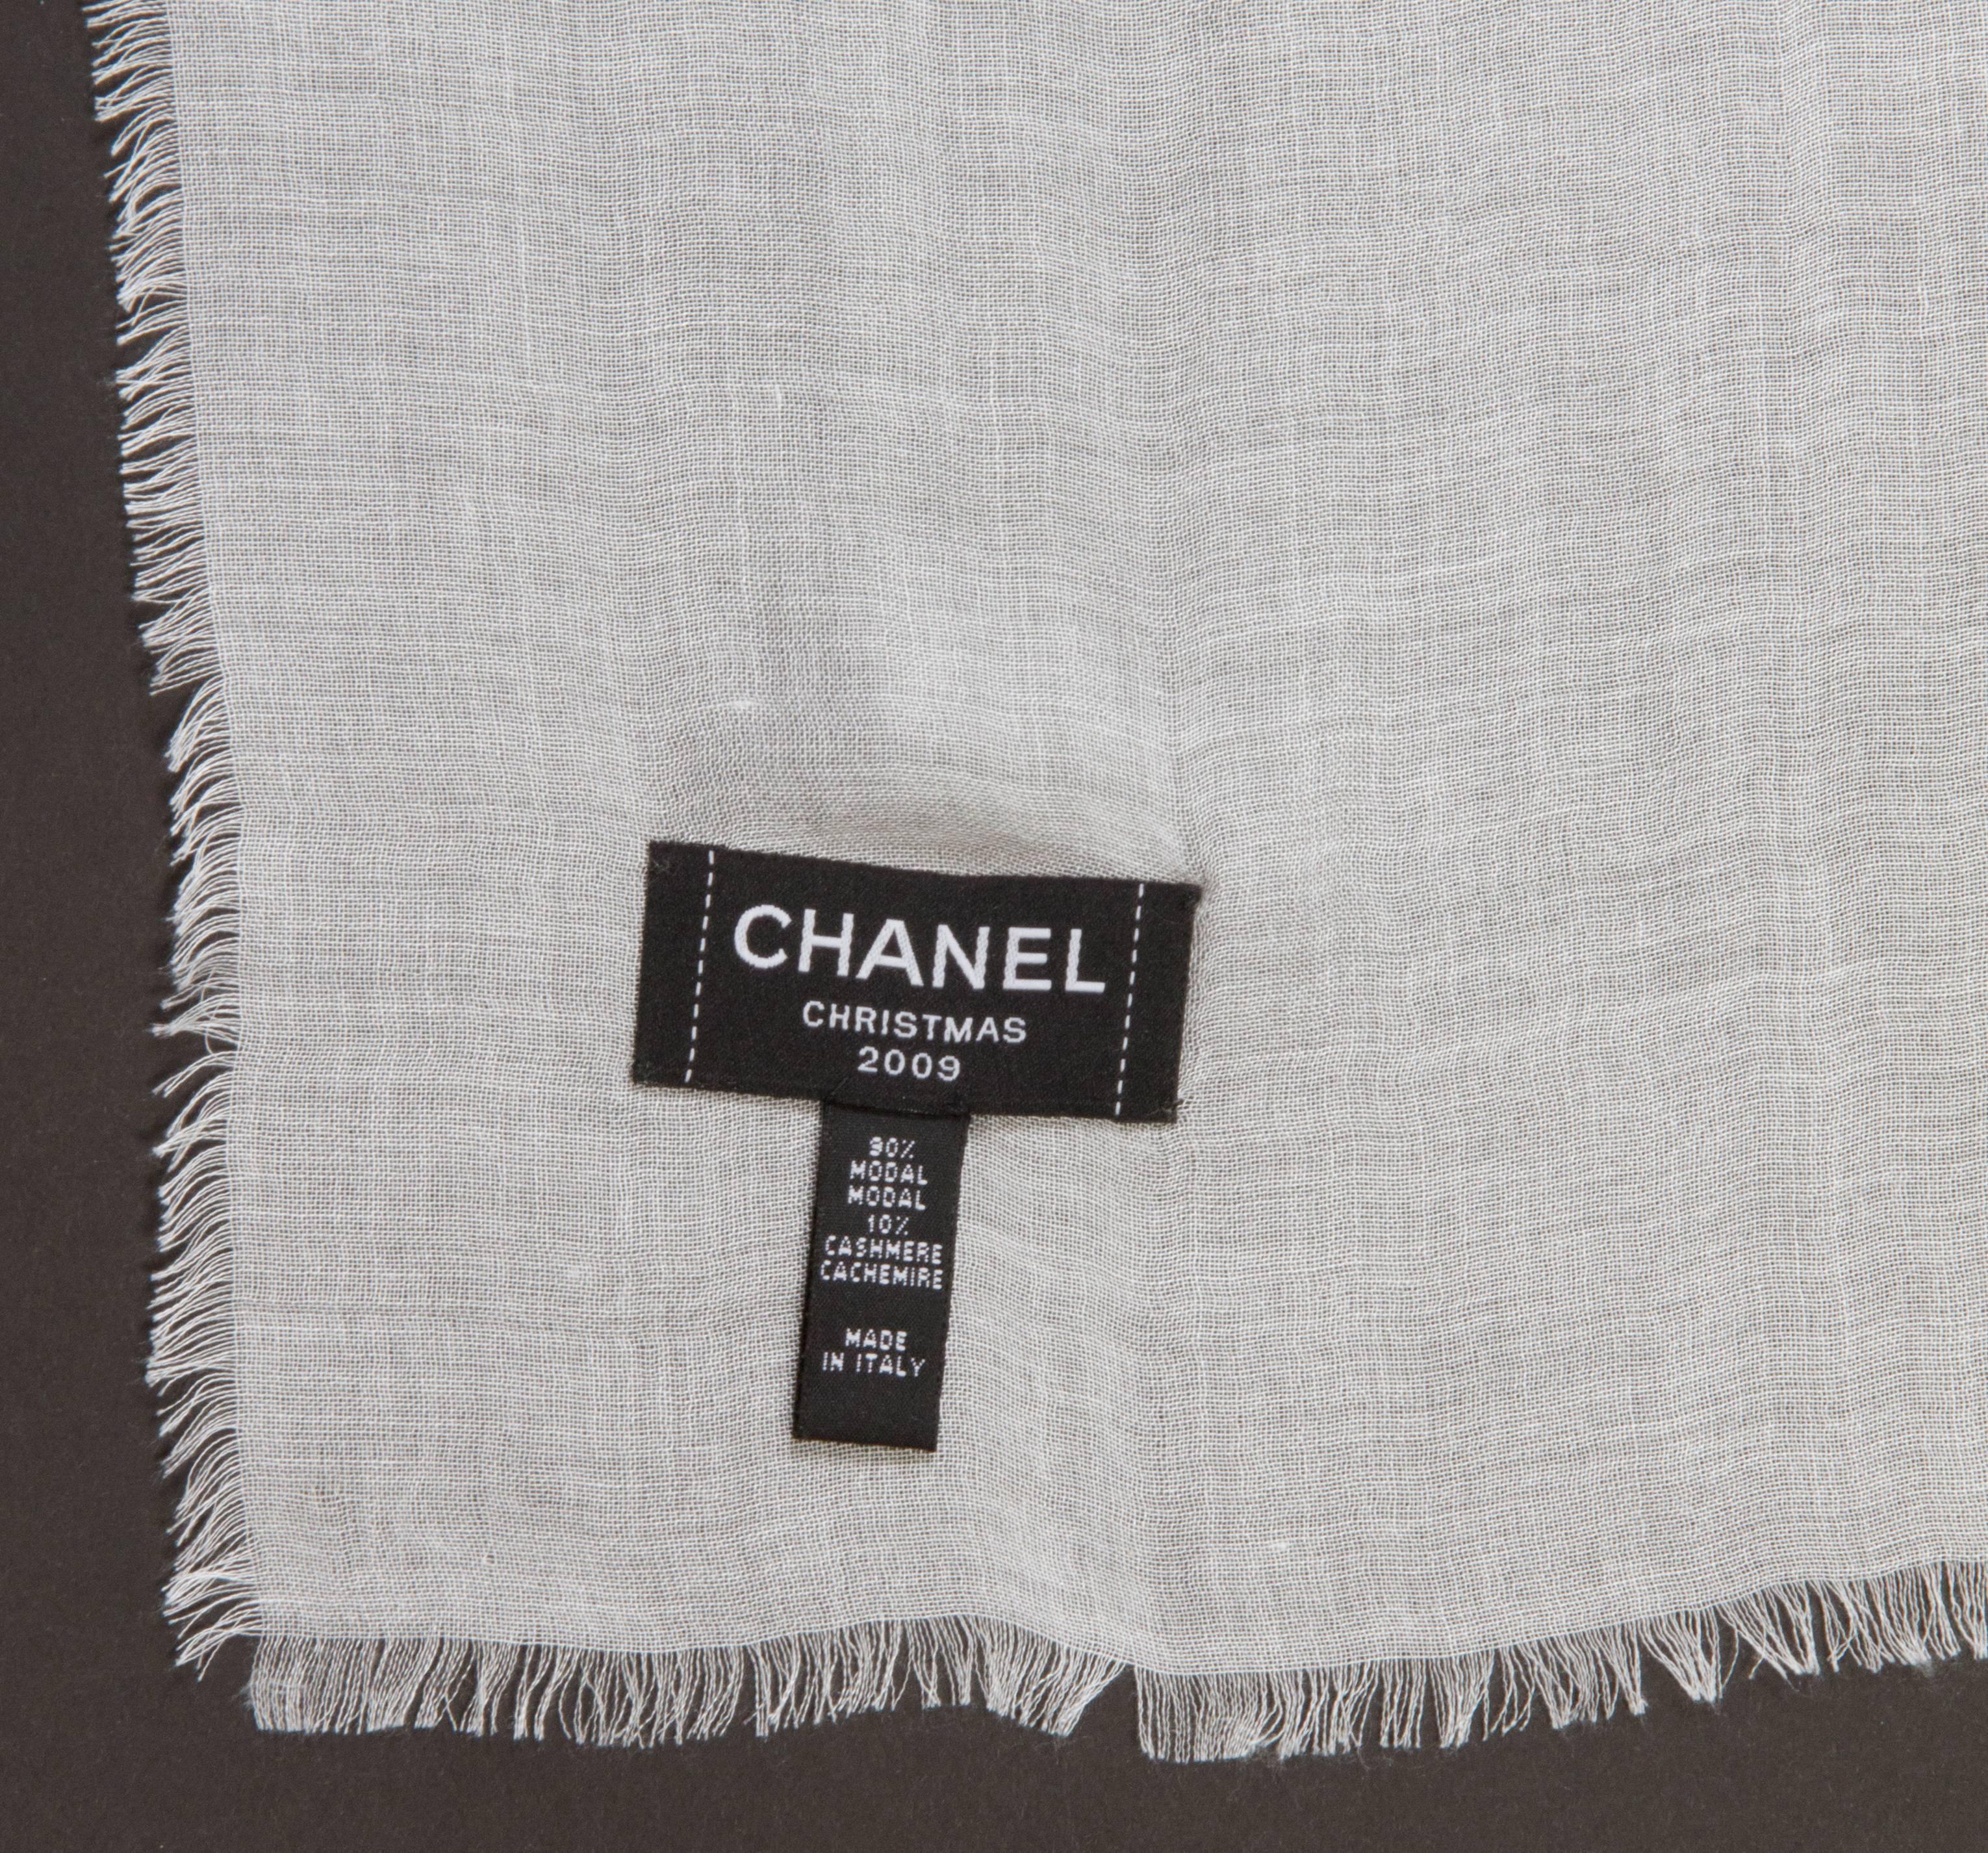 Pair of CHANEL Scarves  from the Christmas 2009 Collection 4